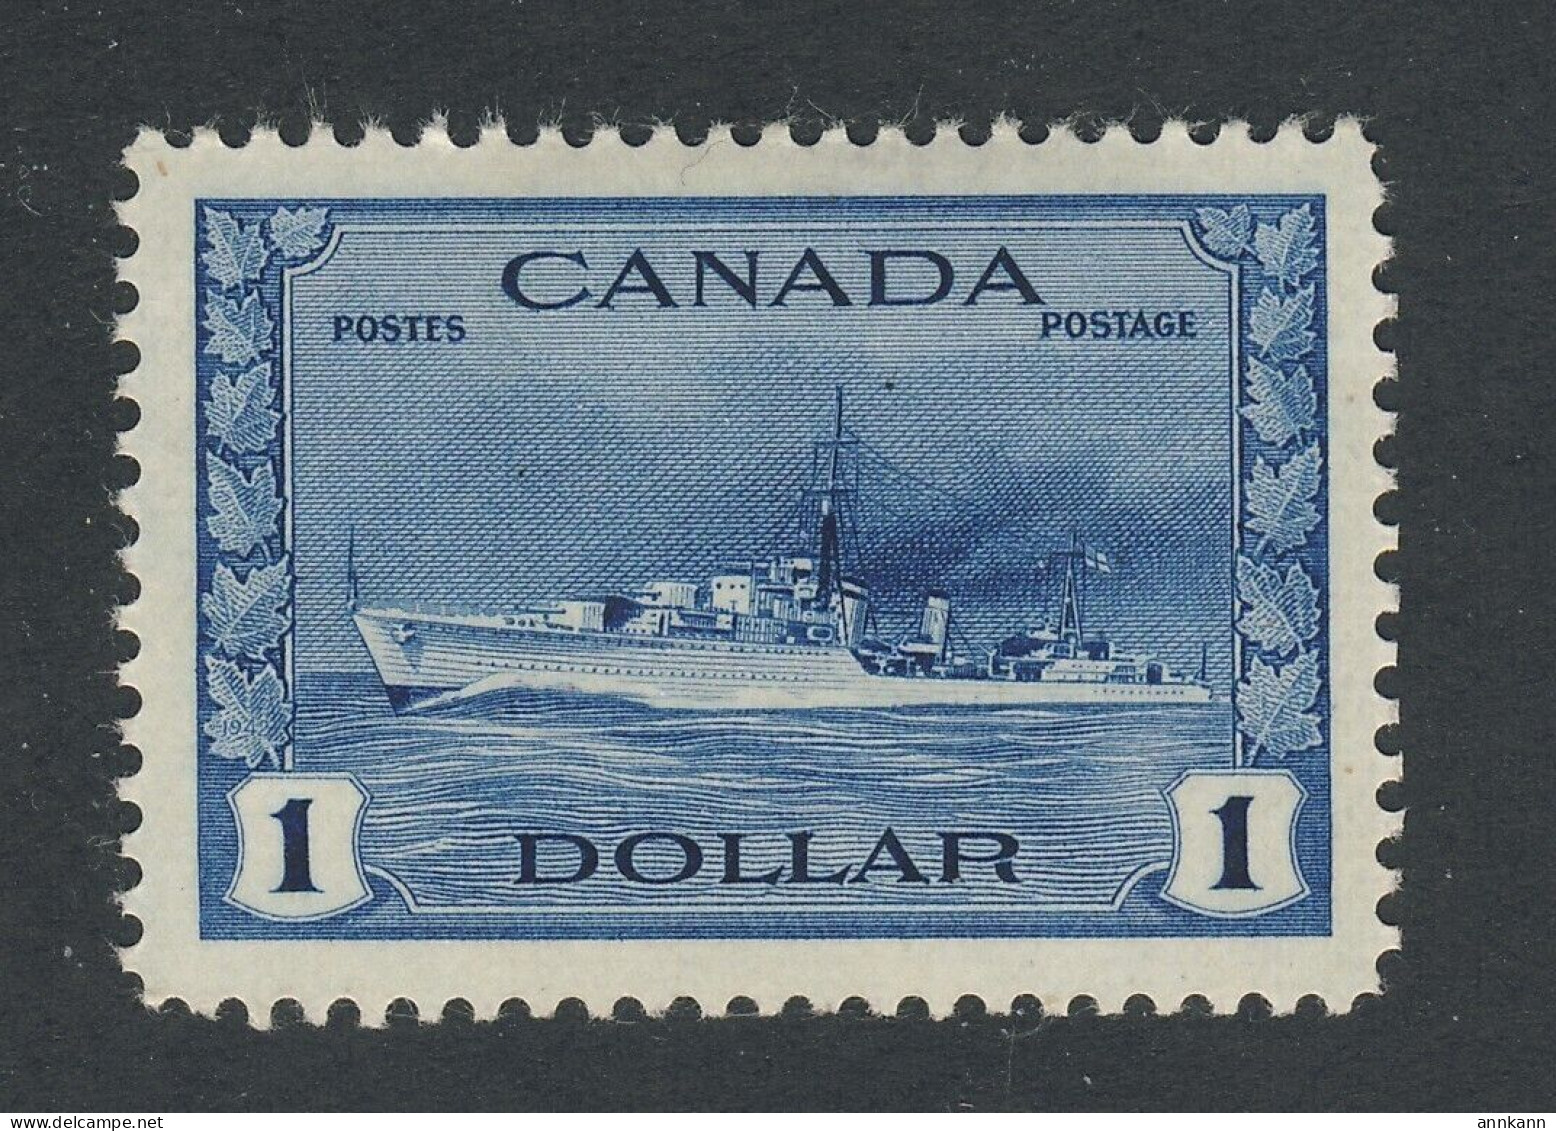 Canada WWII World War 2 - Destroyer Stamp; #262-$1.00 Destroyer MH (mint Hinged) - Unused Stamps